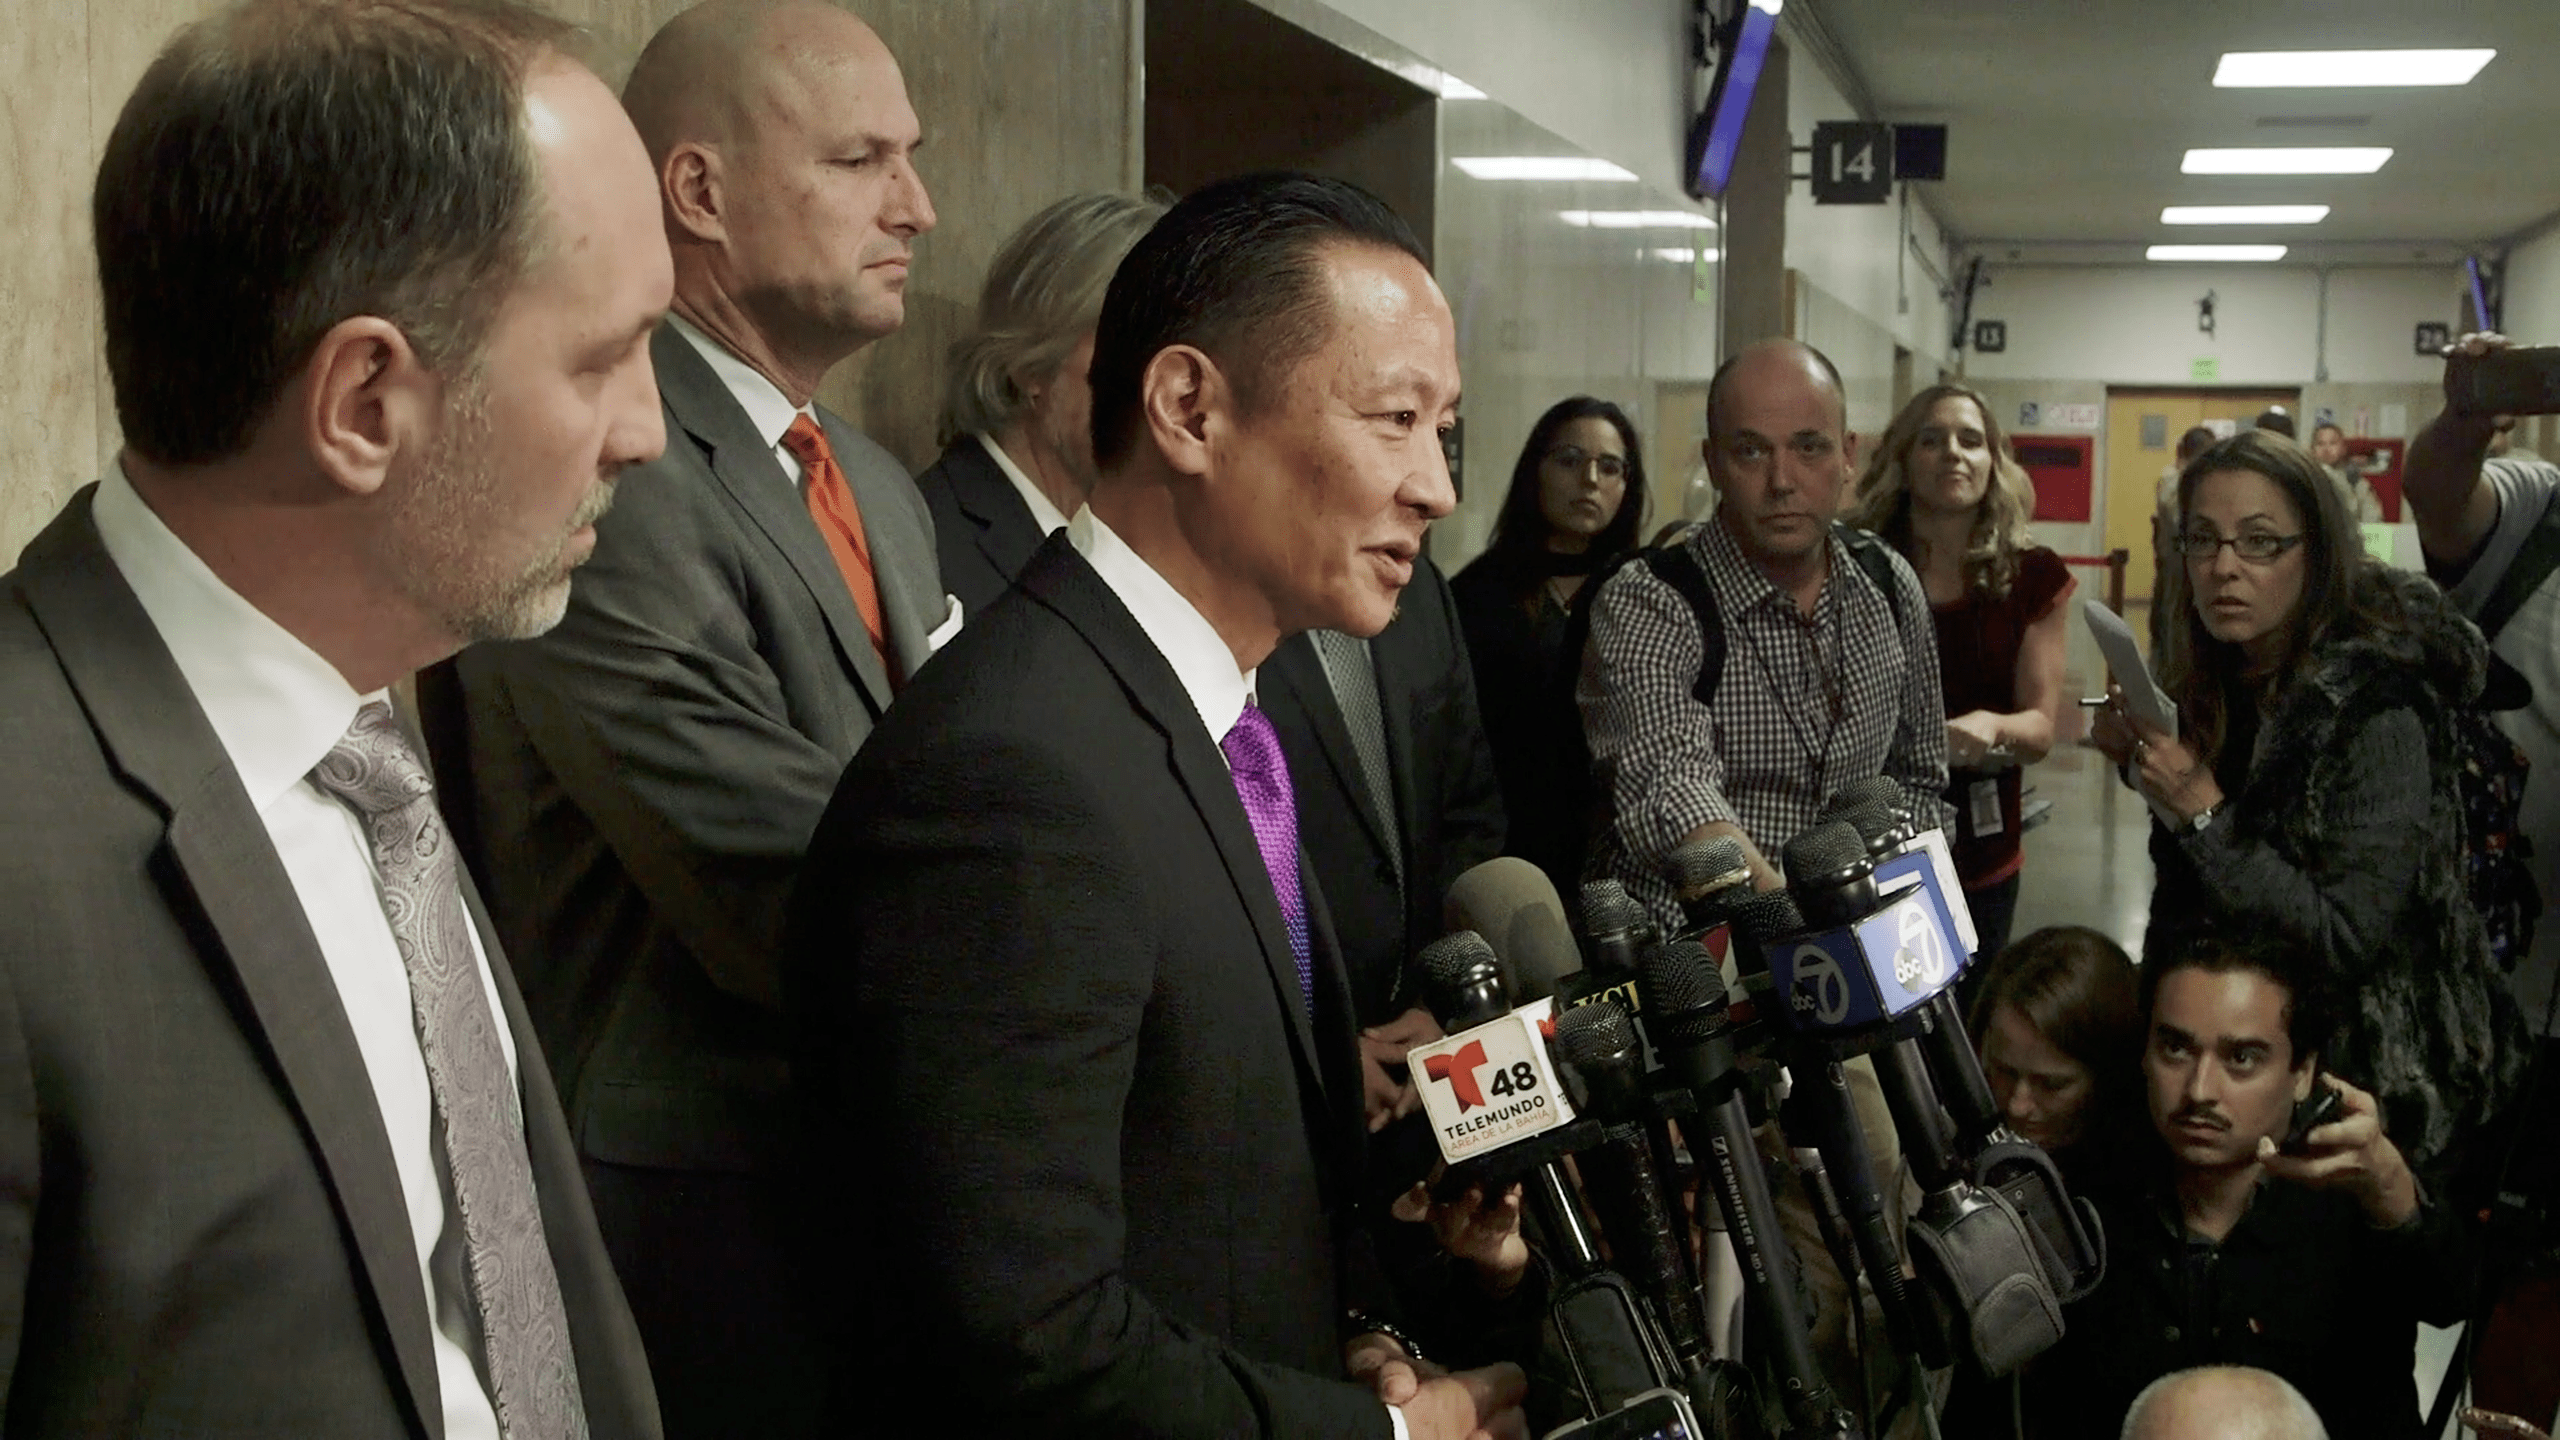 5 Takeaways From ‘Ricochet,’ a New Documentary About Jeff Adachi and the Kate Steinle Case